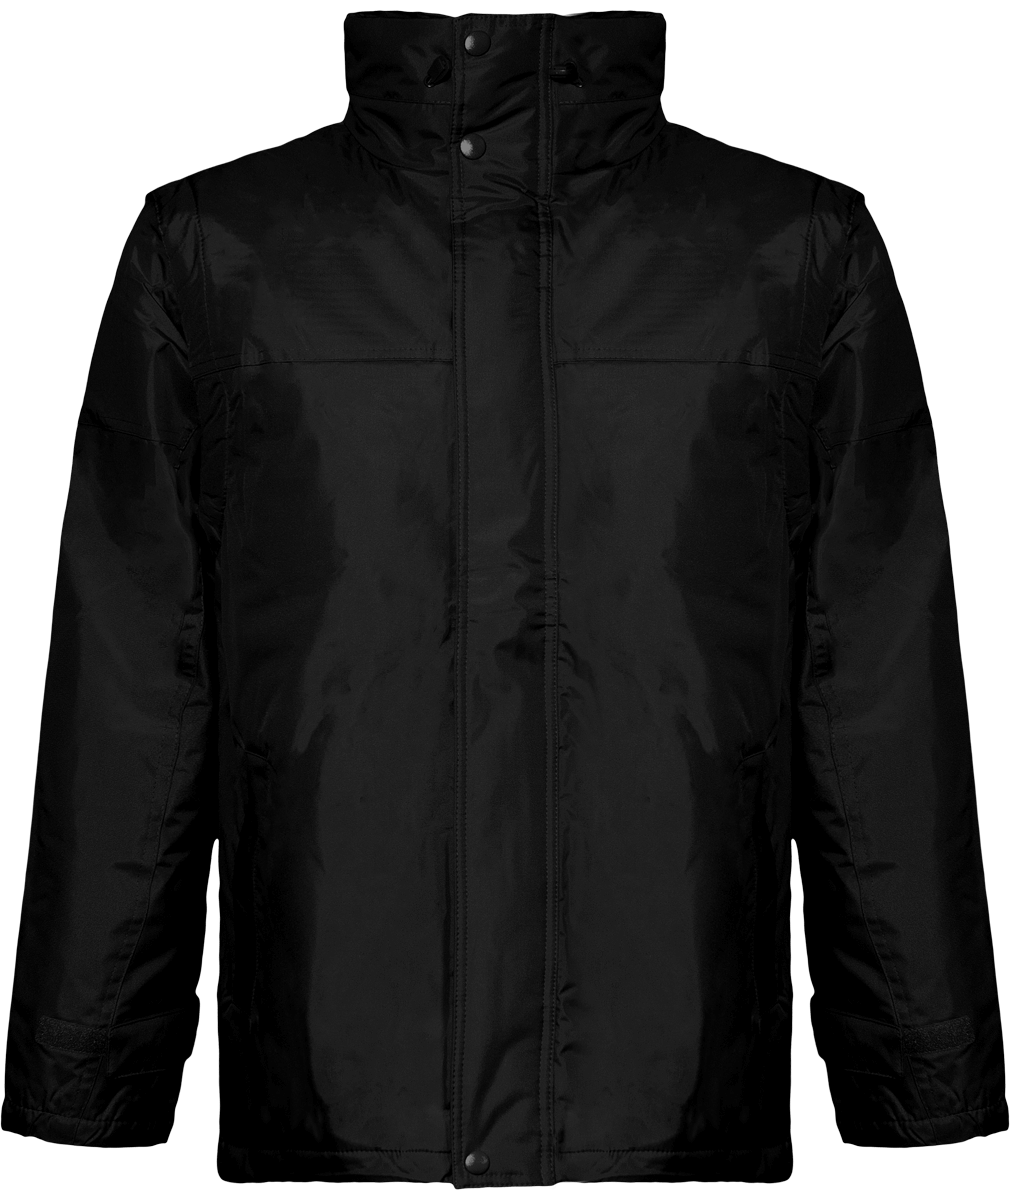 Premium Quality Factory Removable Sleeve Jacket To Personalise Black